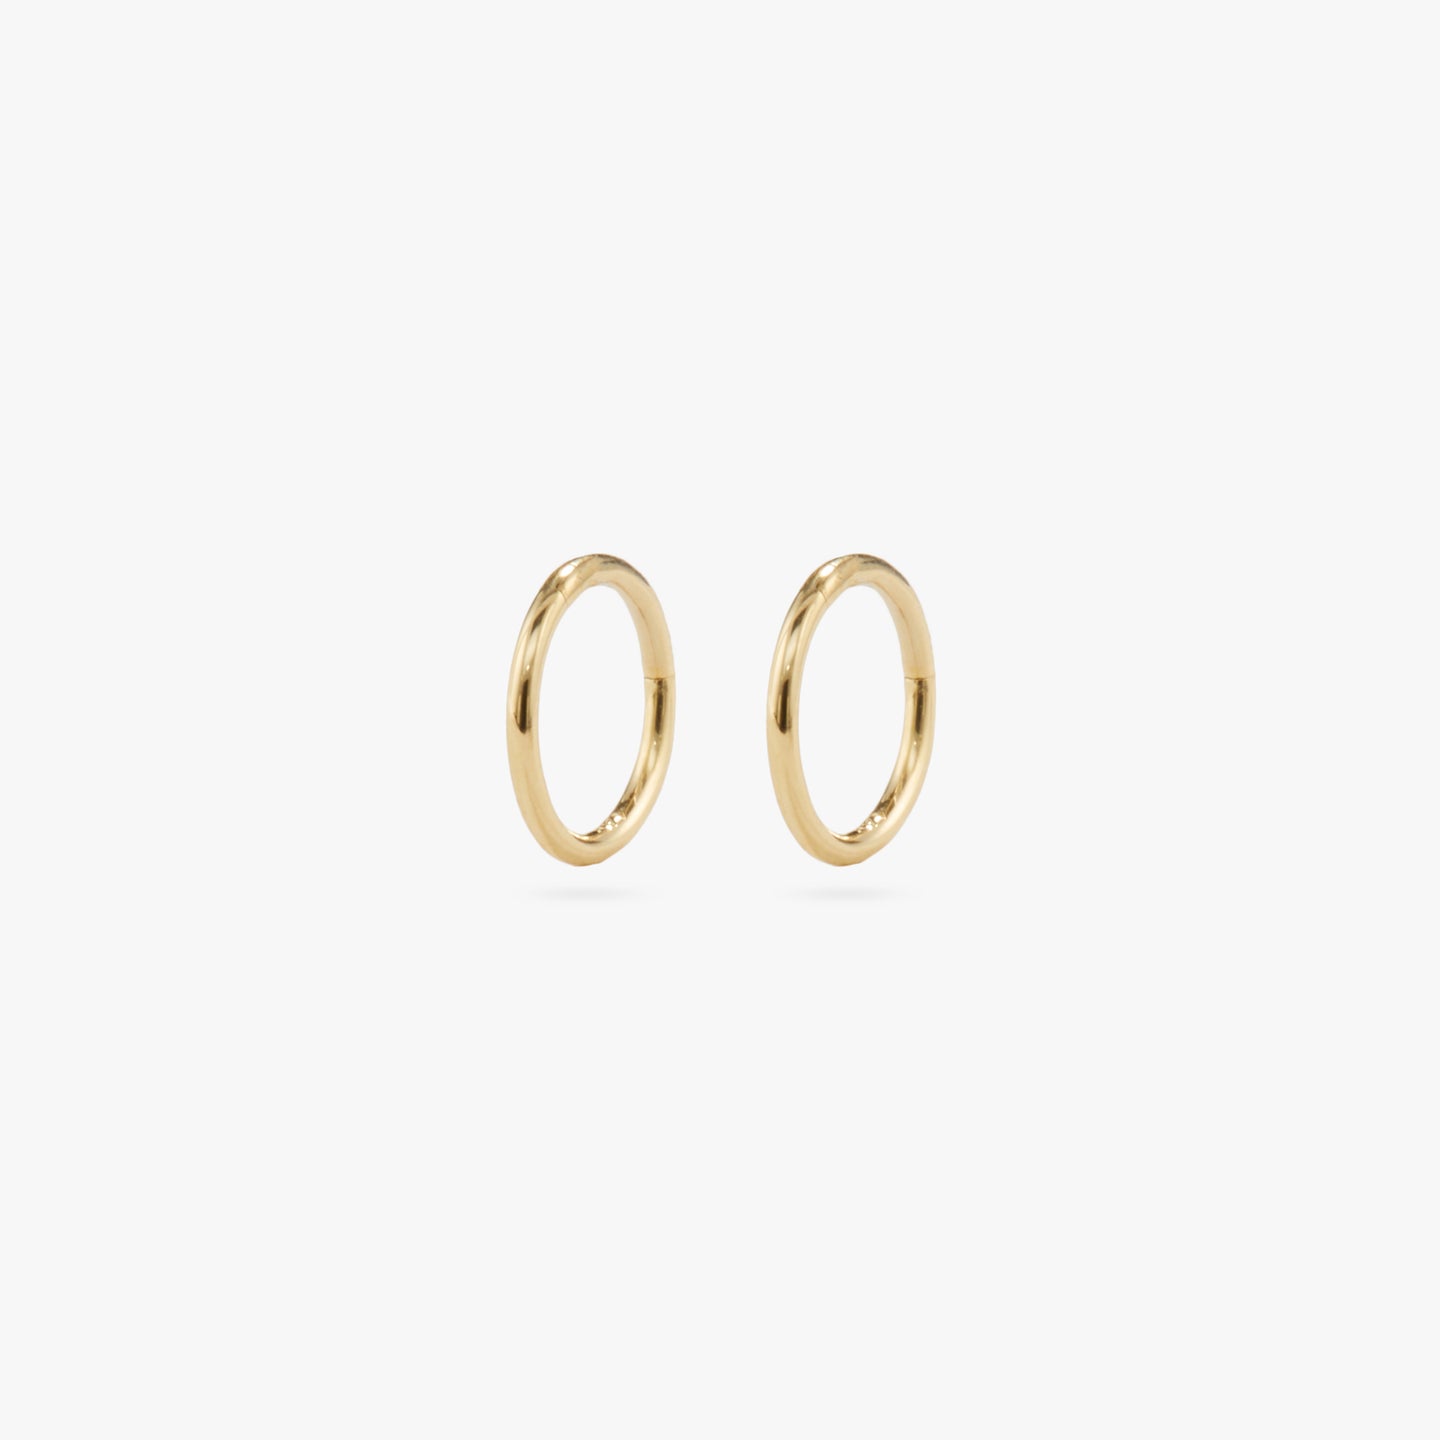 This is a gold clicker earring [pair] color:null|gold